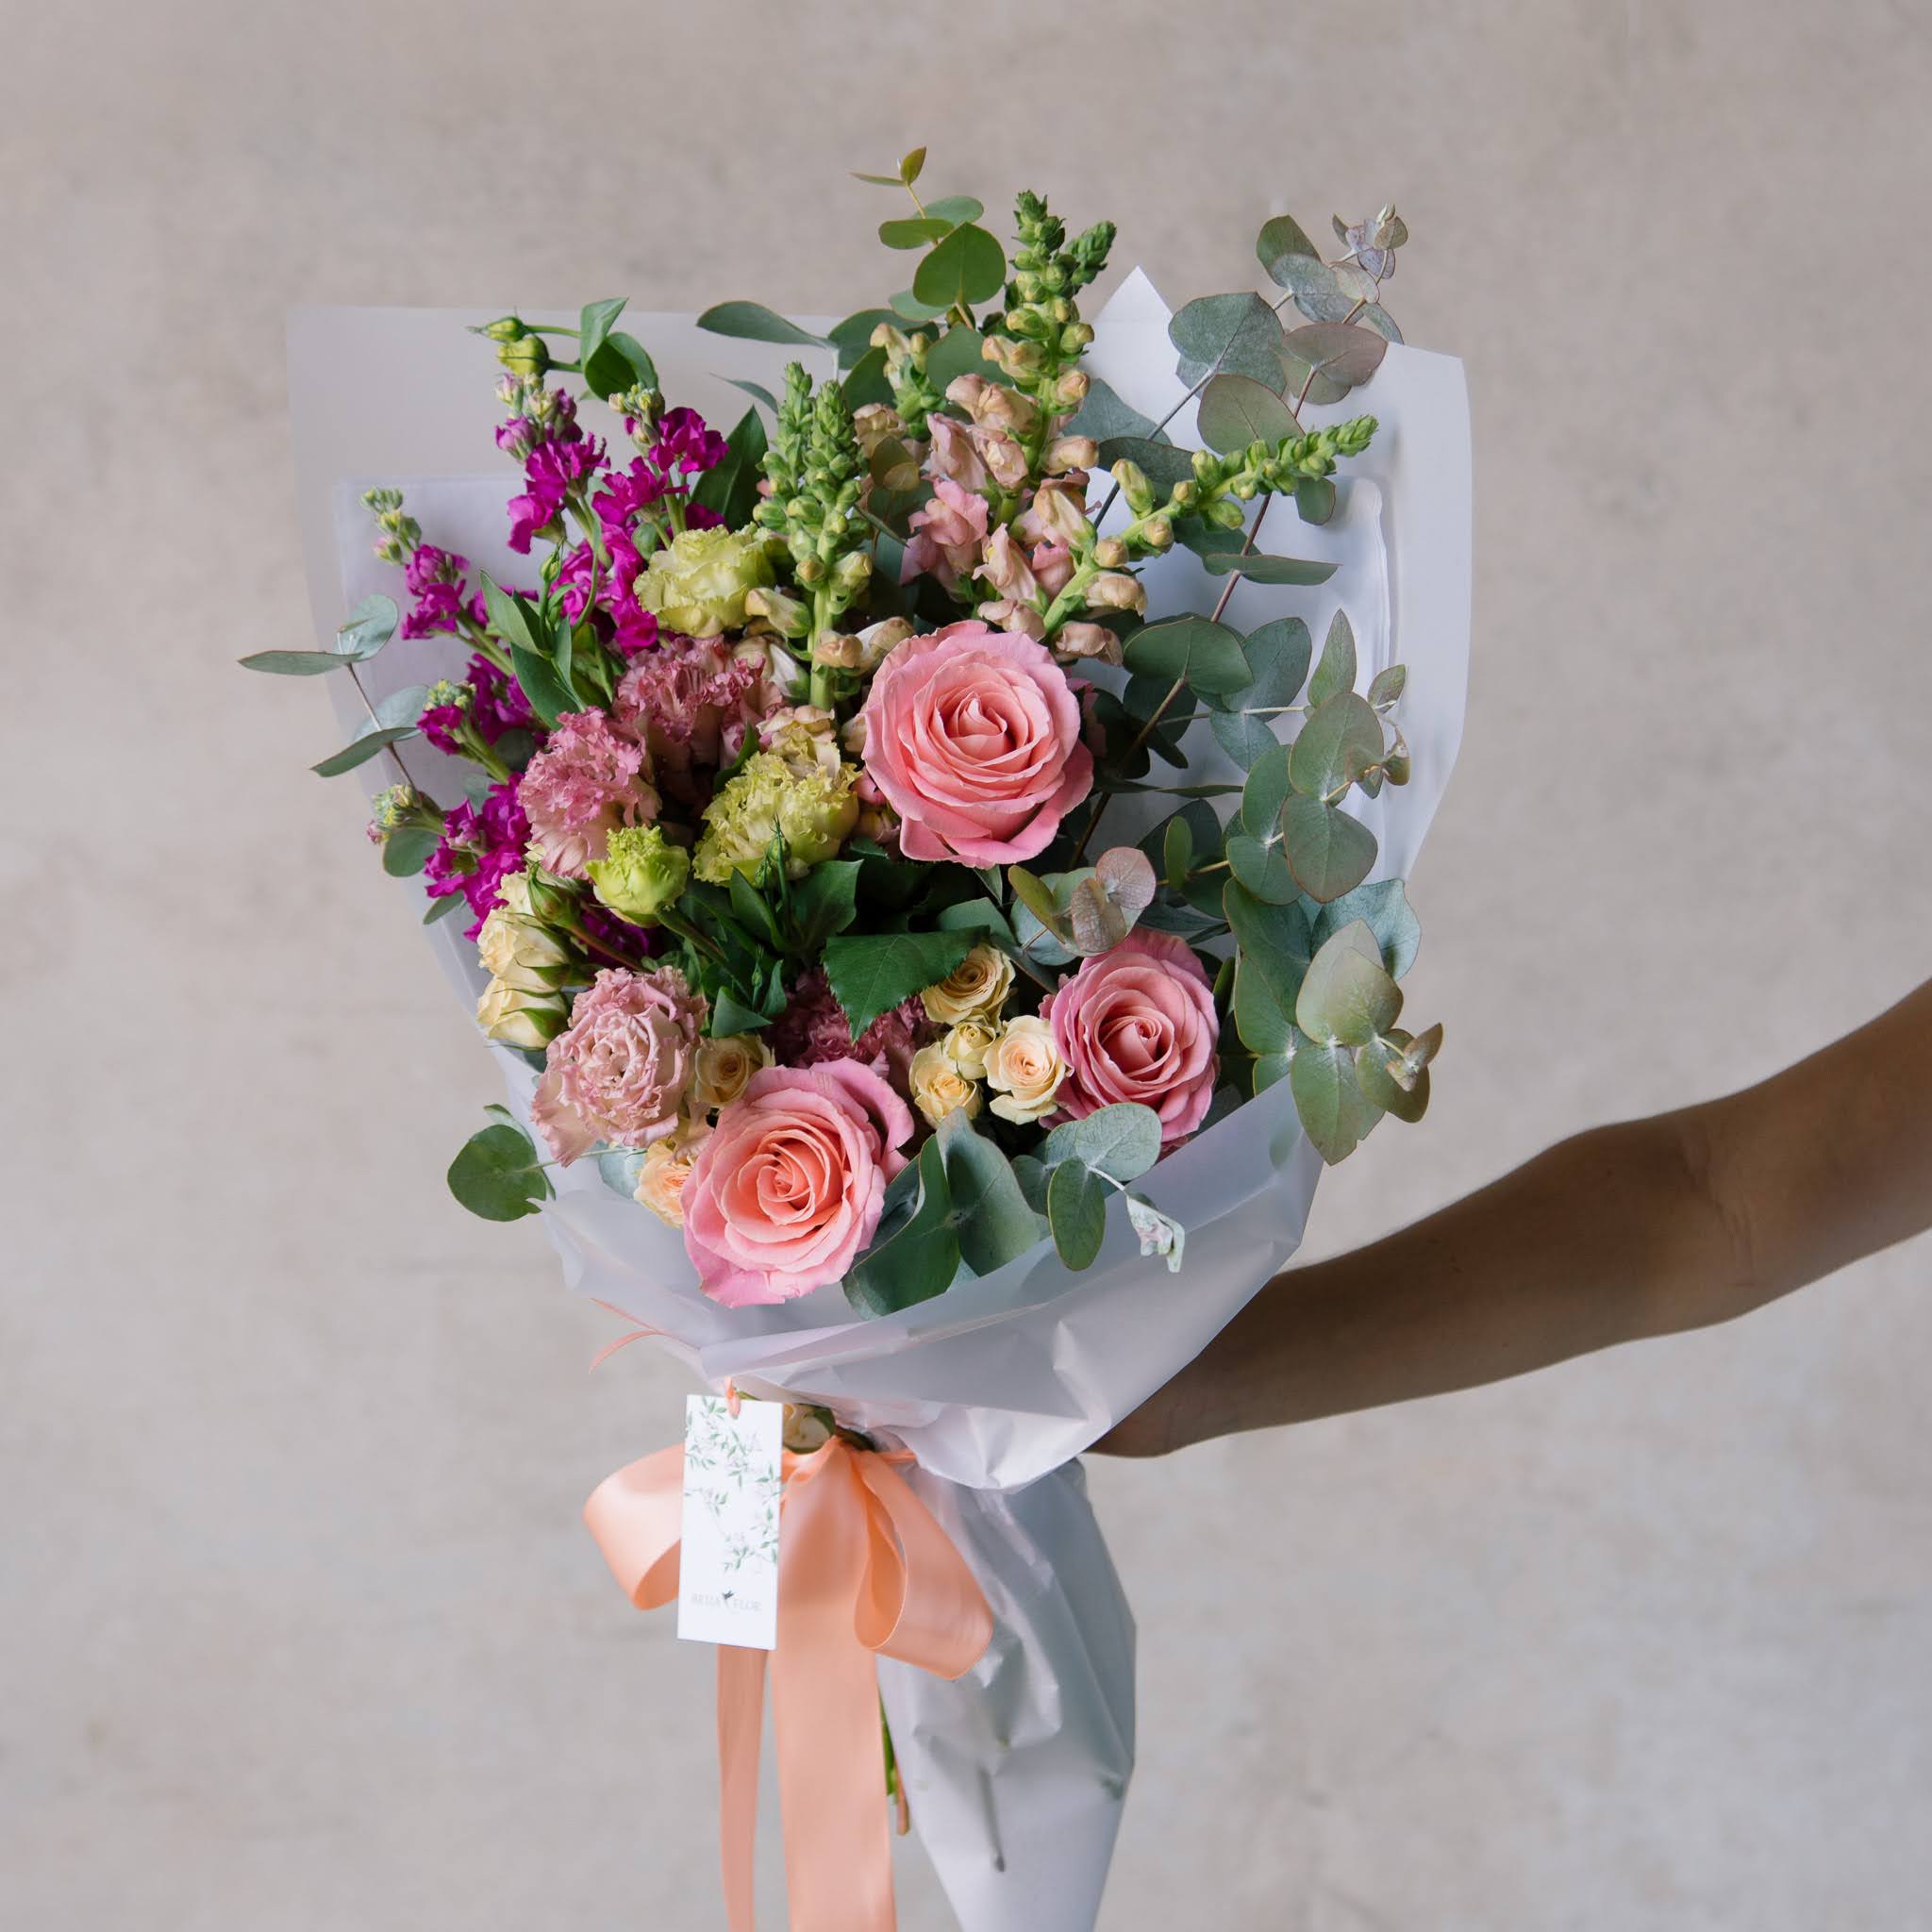 Mother's Day bouquet with roses, lisianthus